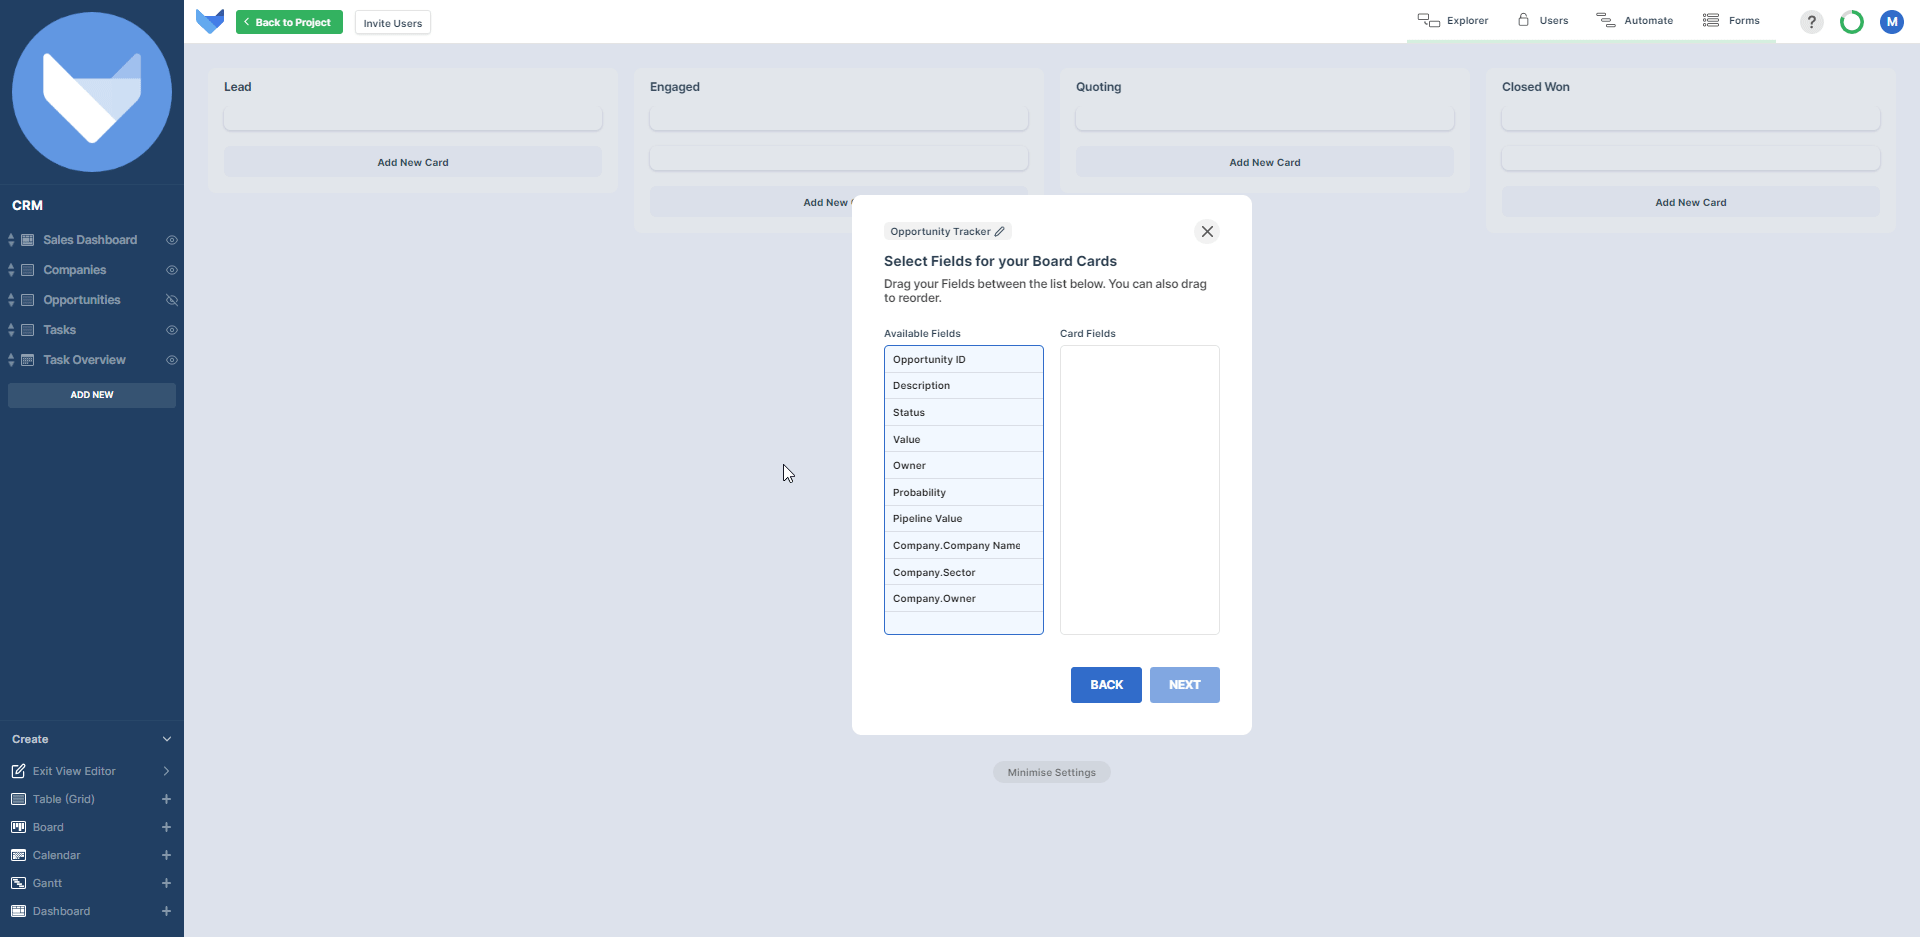 Specify Fields to show on Board Cards